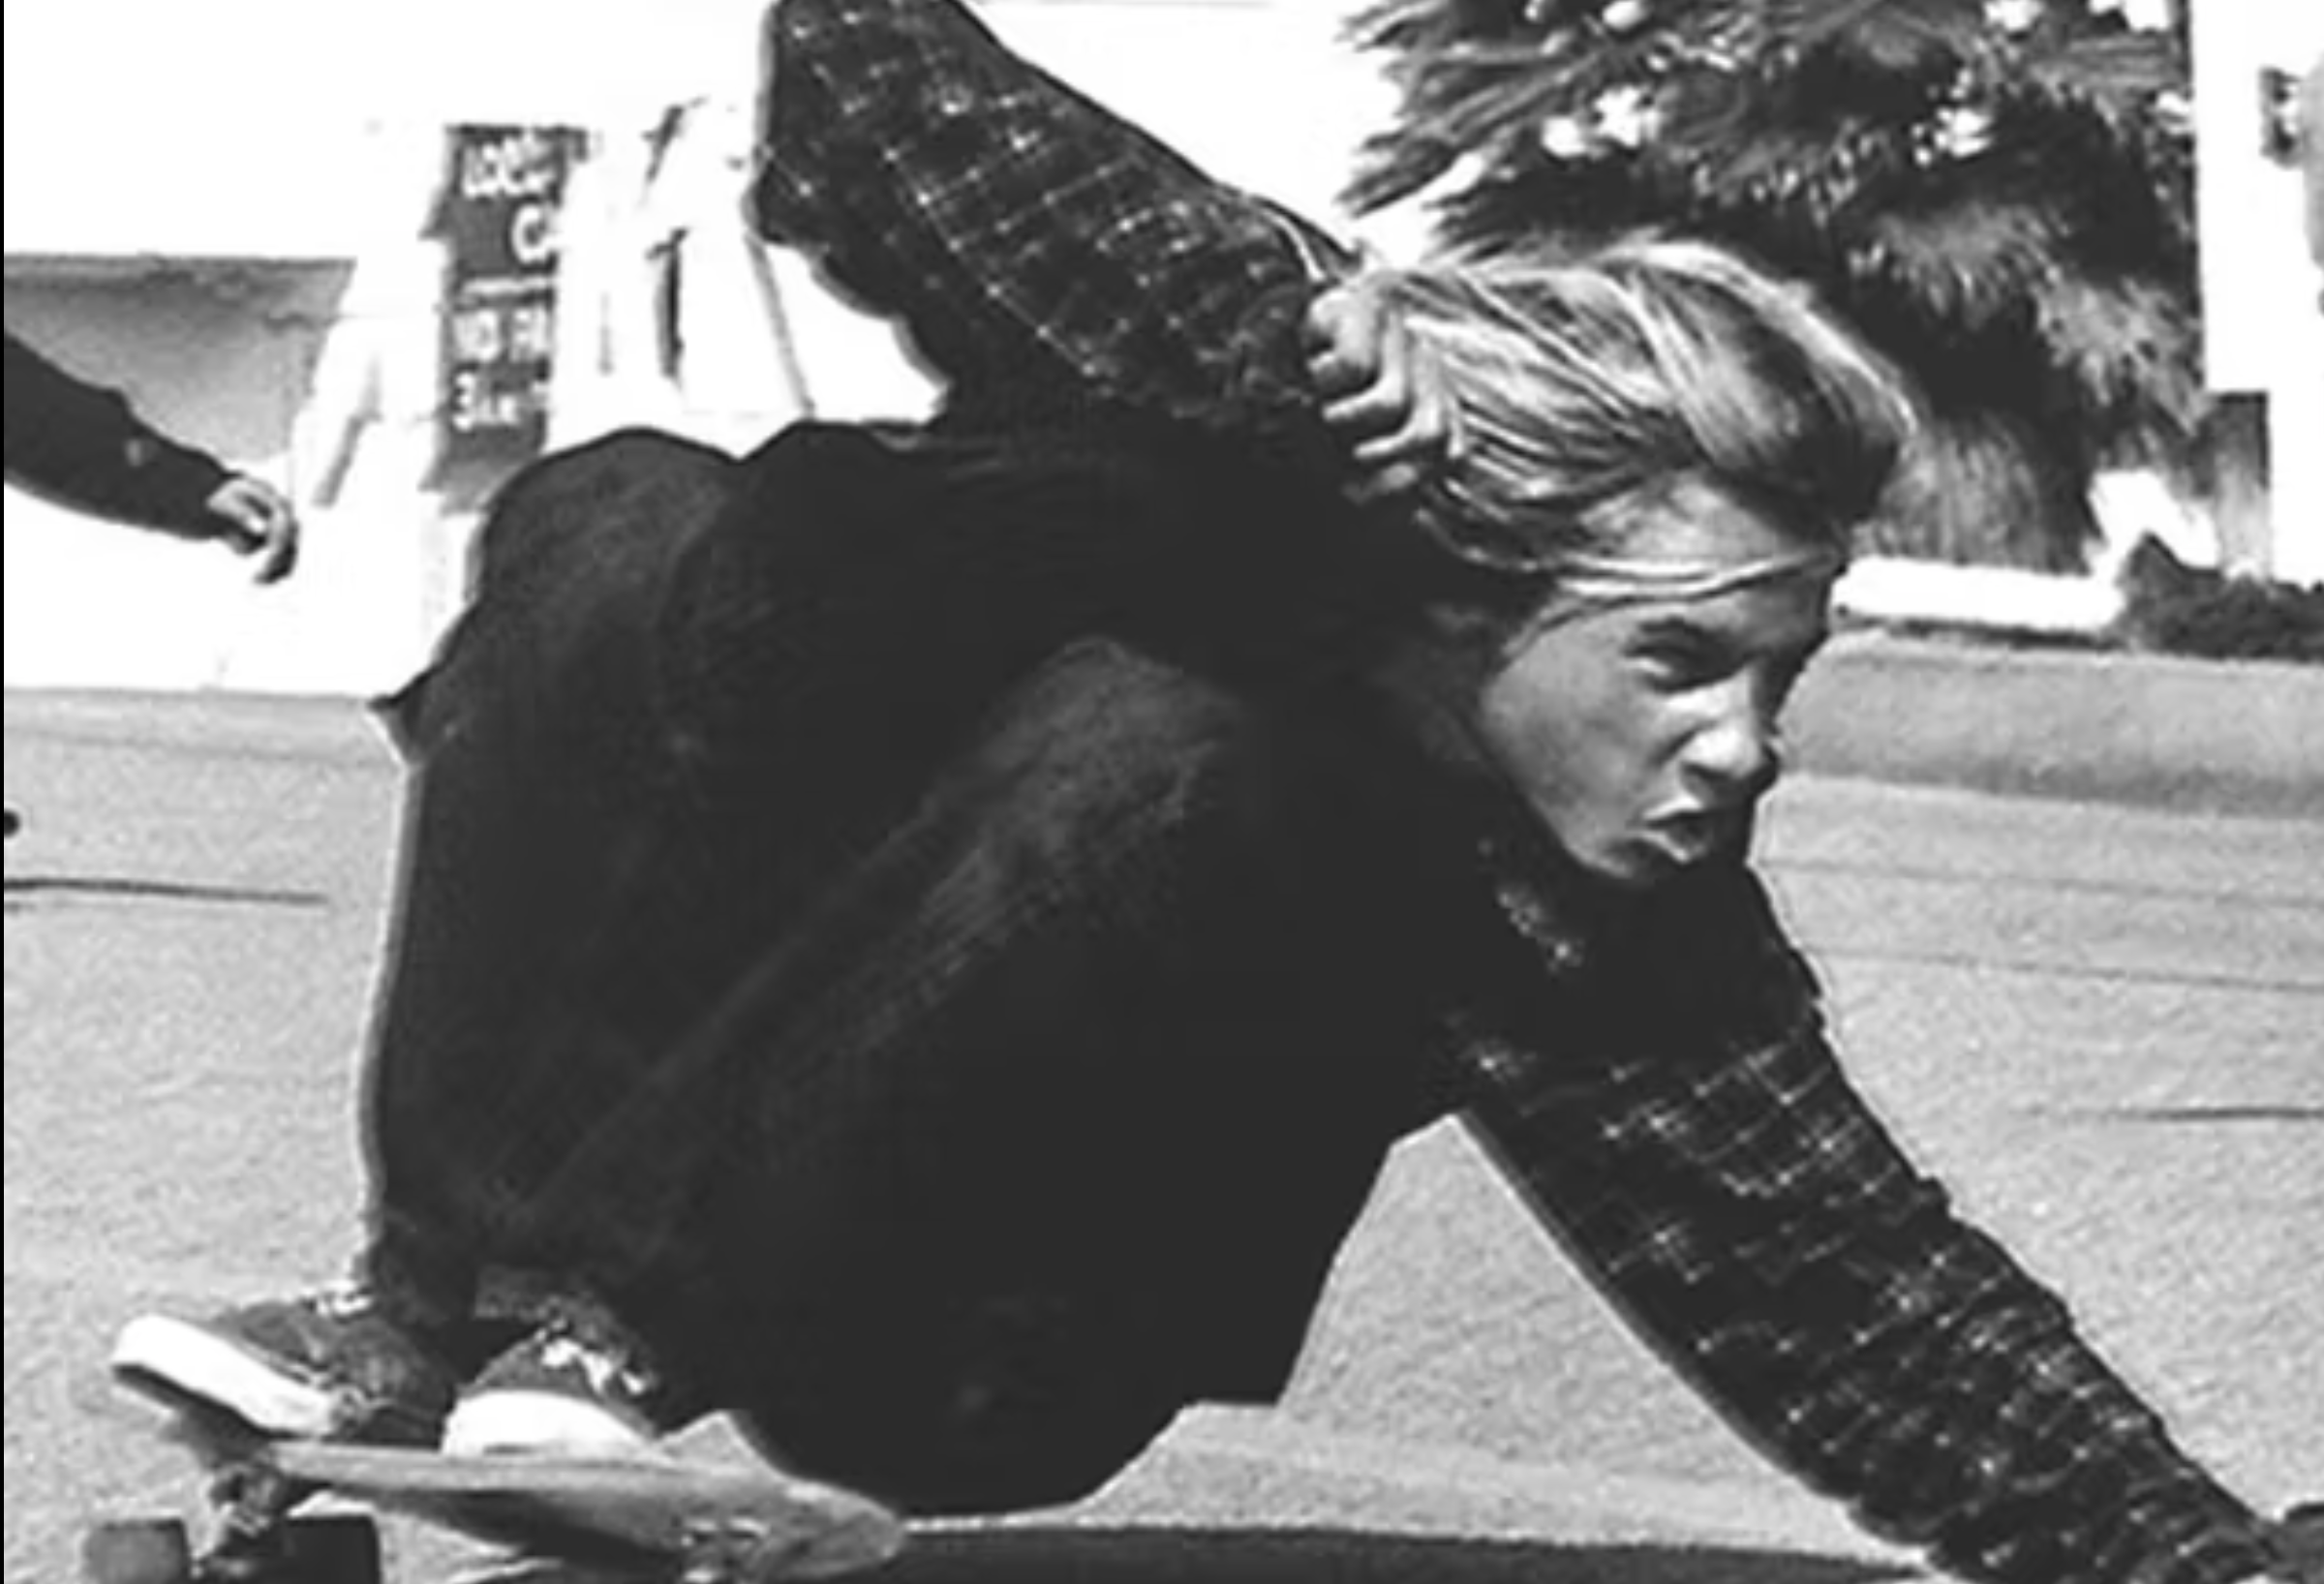 Dogtown and Z-Boys / Documentary Feature / Stacy Peralta / Writer / Director / Agi Orsi Productions, Vans Chelsea Poster